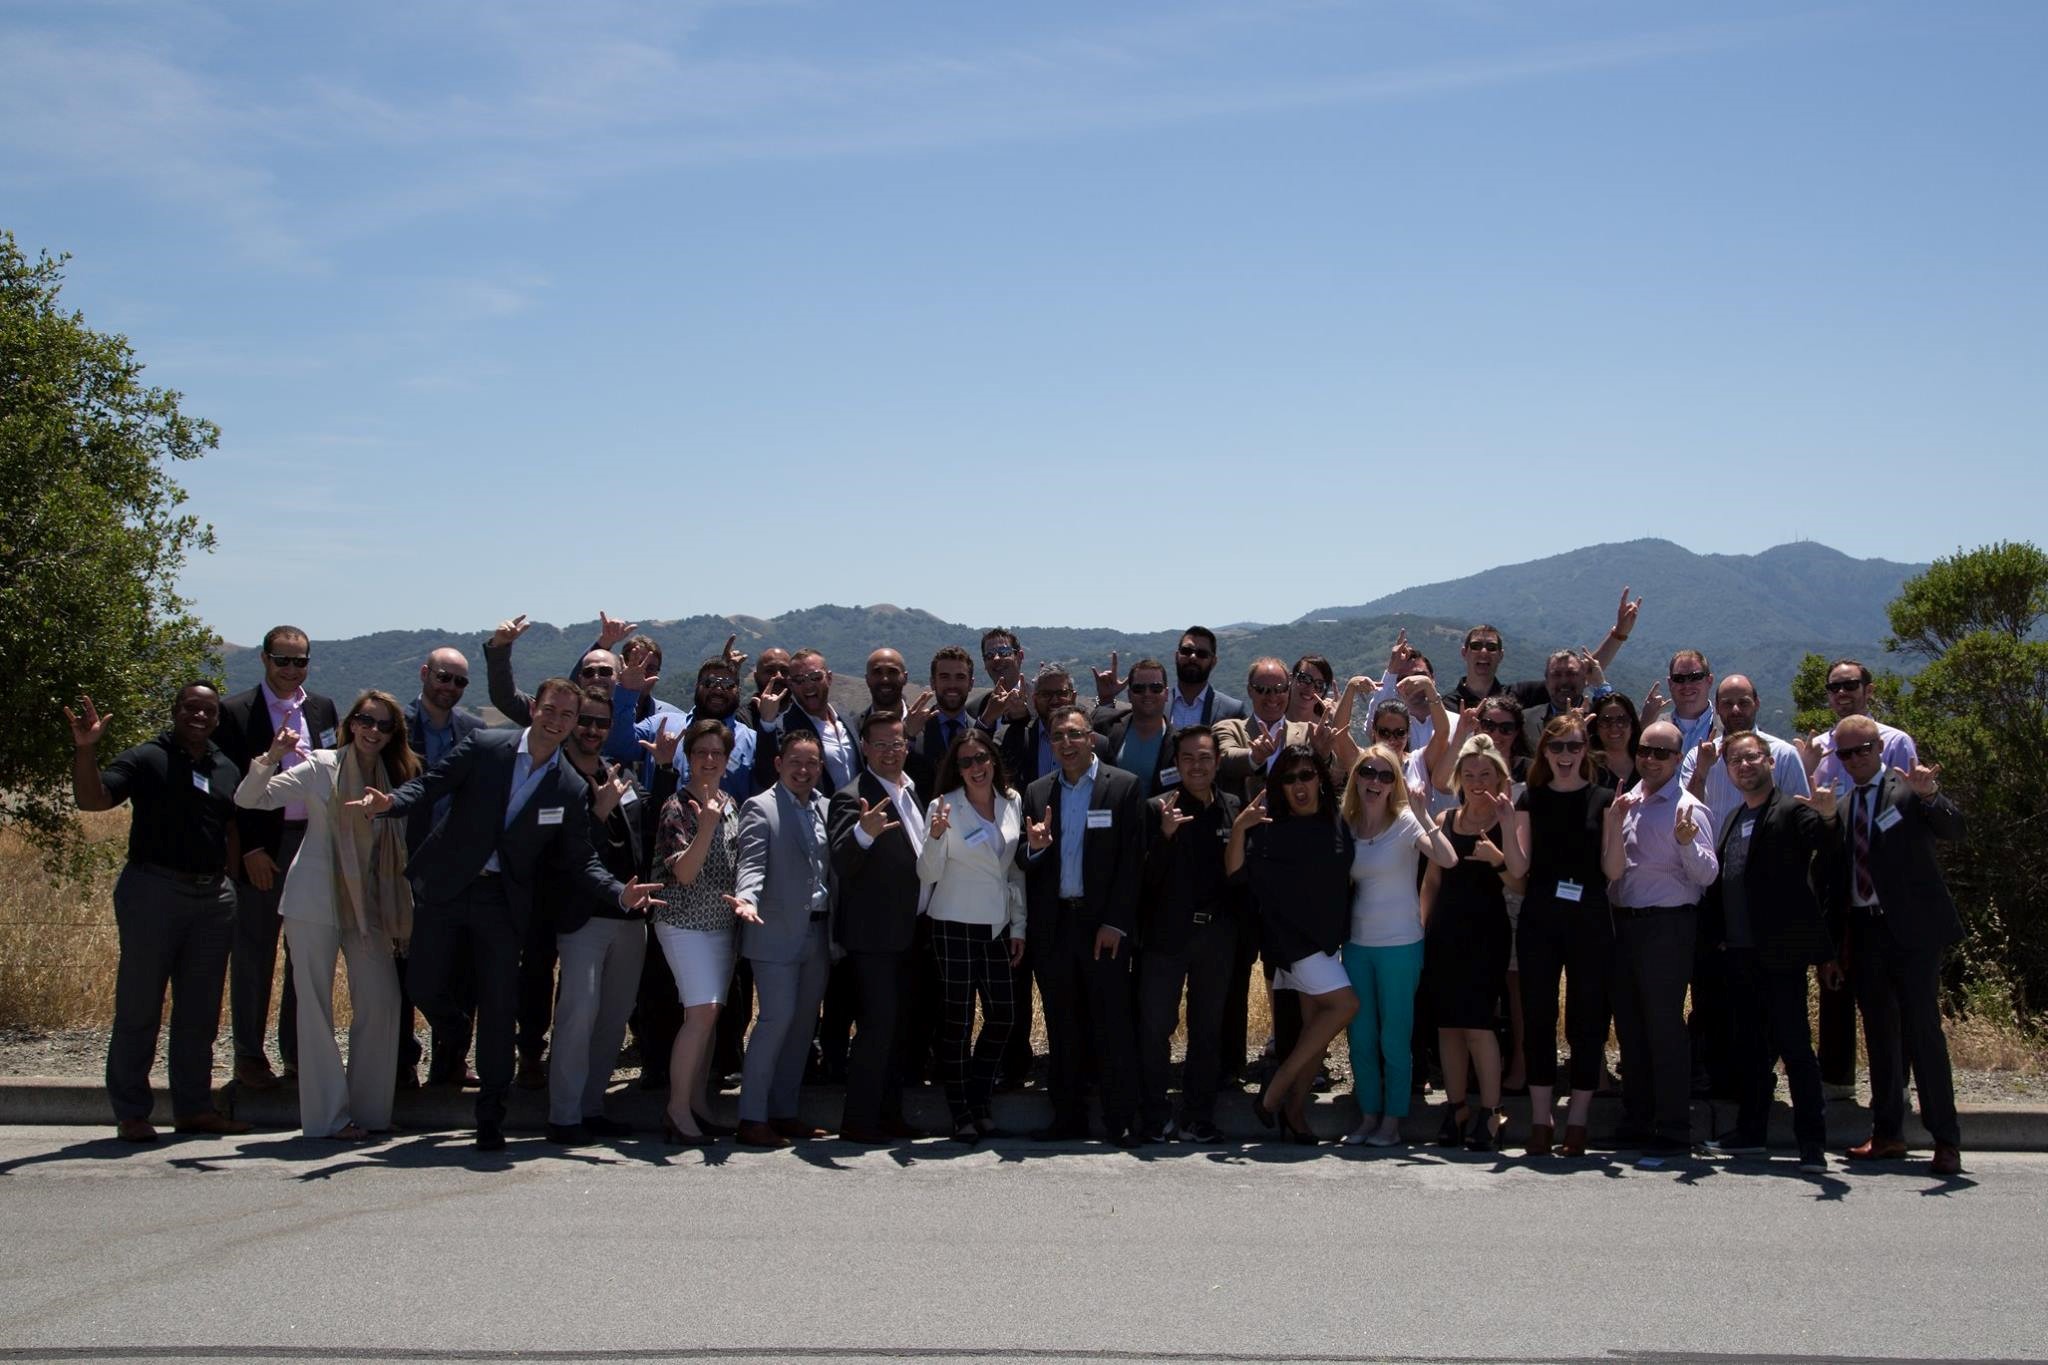 University of Ottawa's Telfer School of Management Executive MBA annual class trip to the Silicon Valley